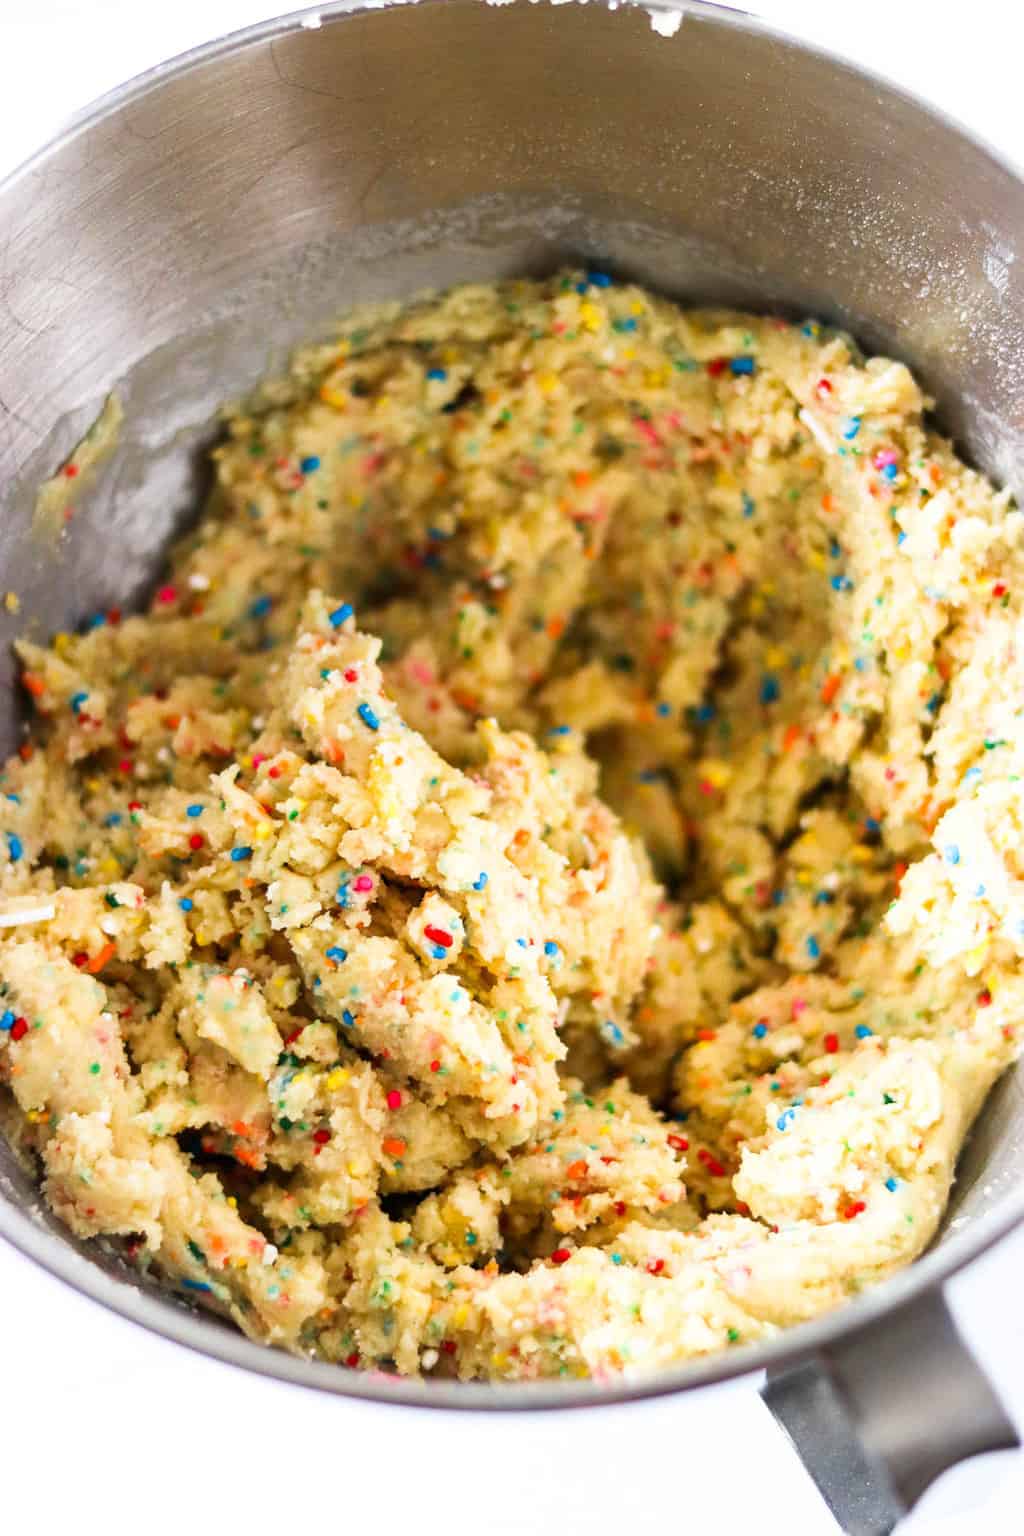 A mixing bowl of confetti cake mix cookie batter